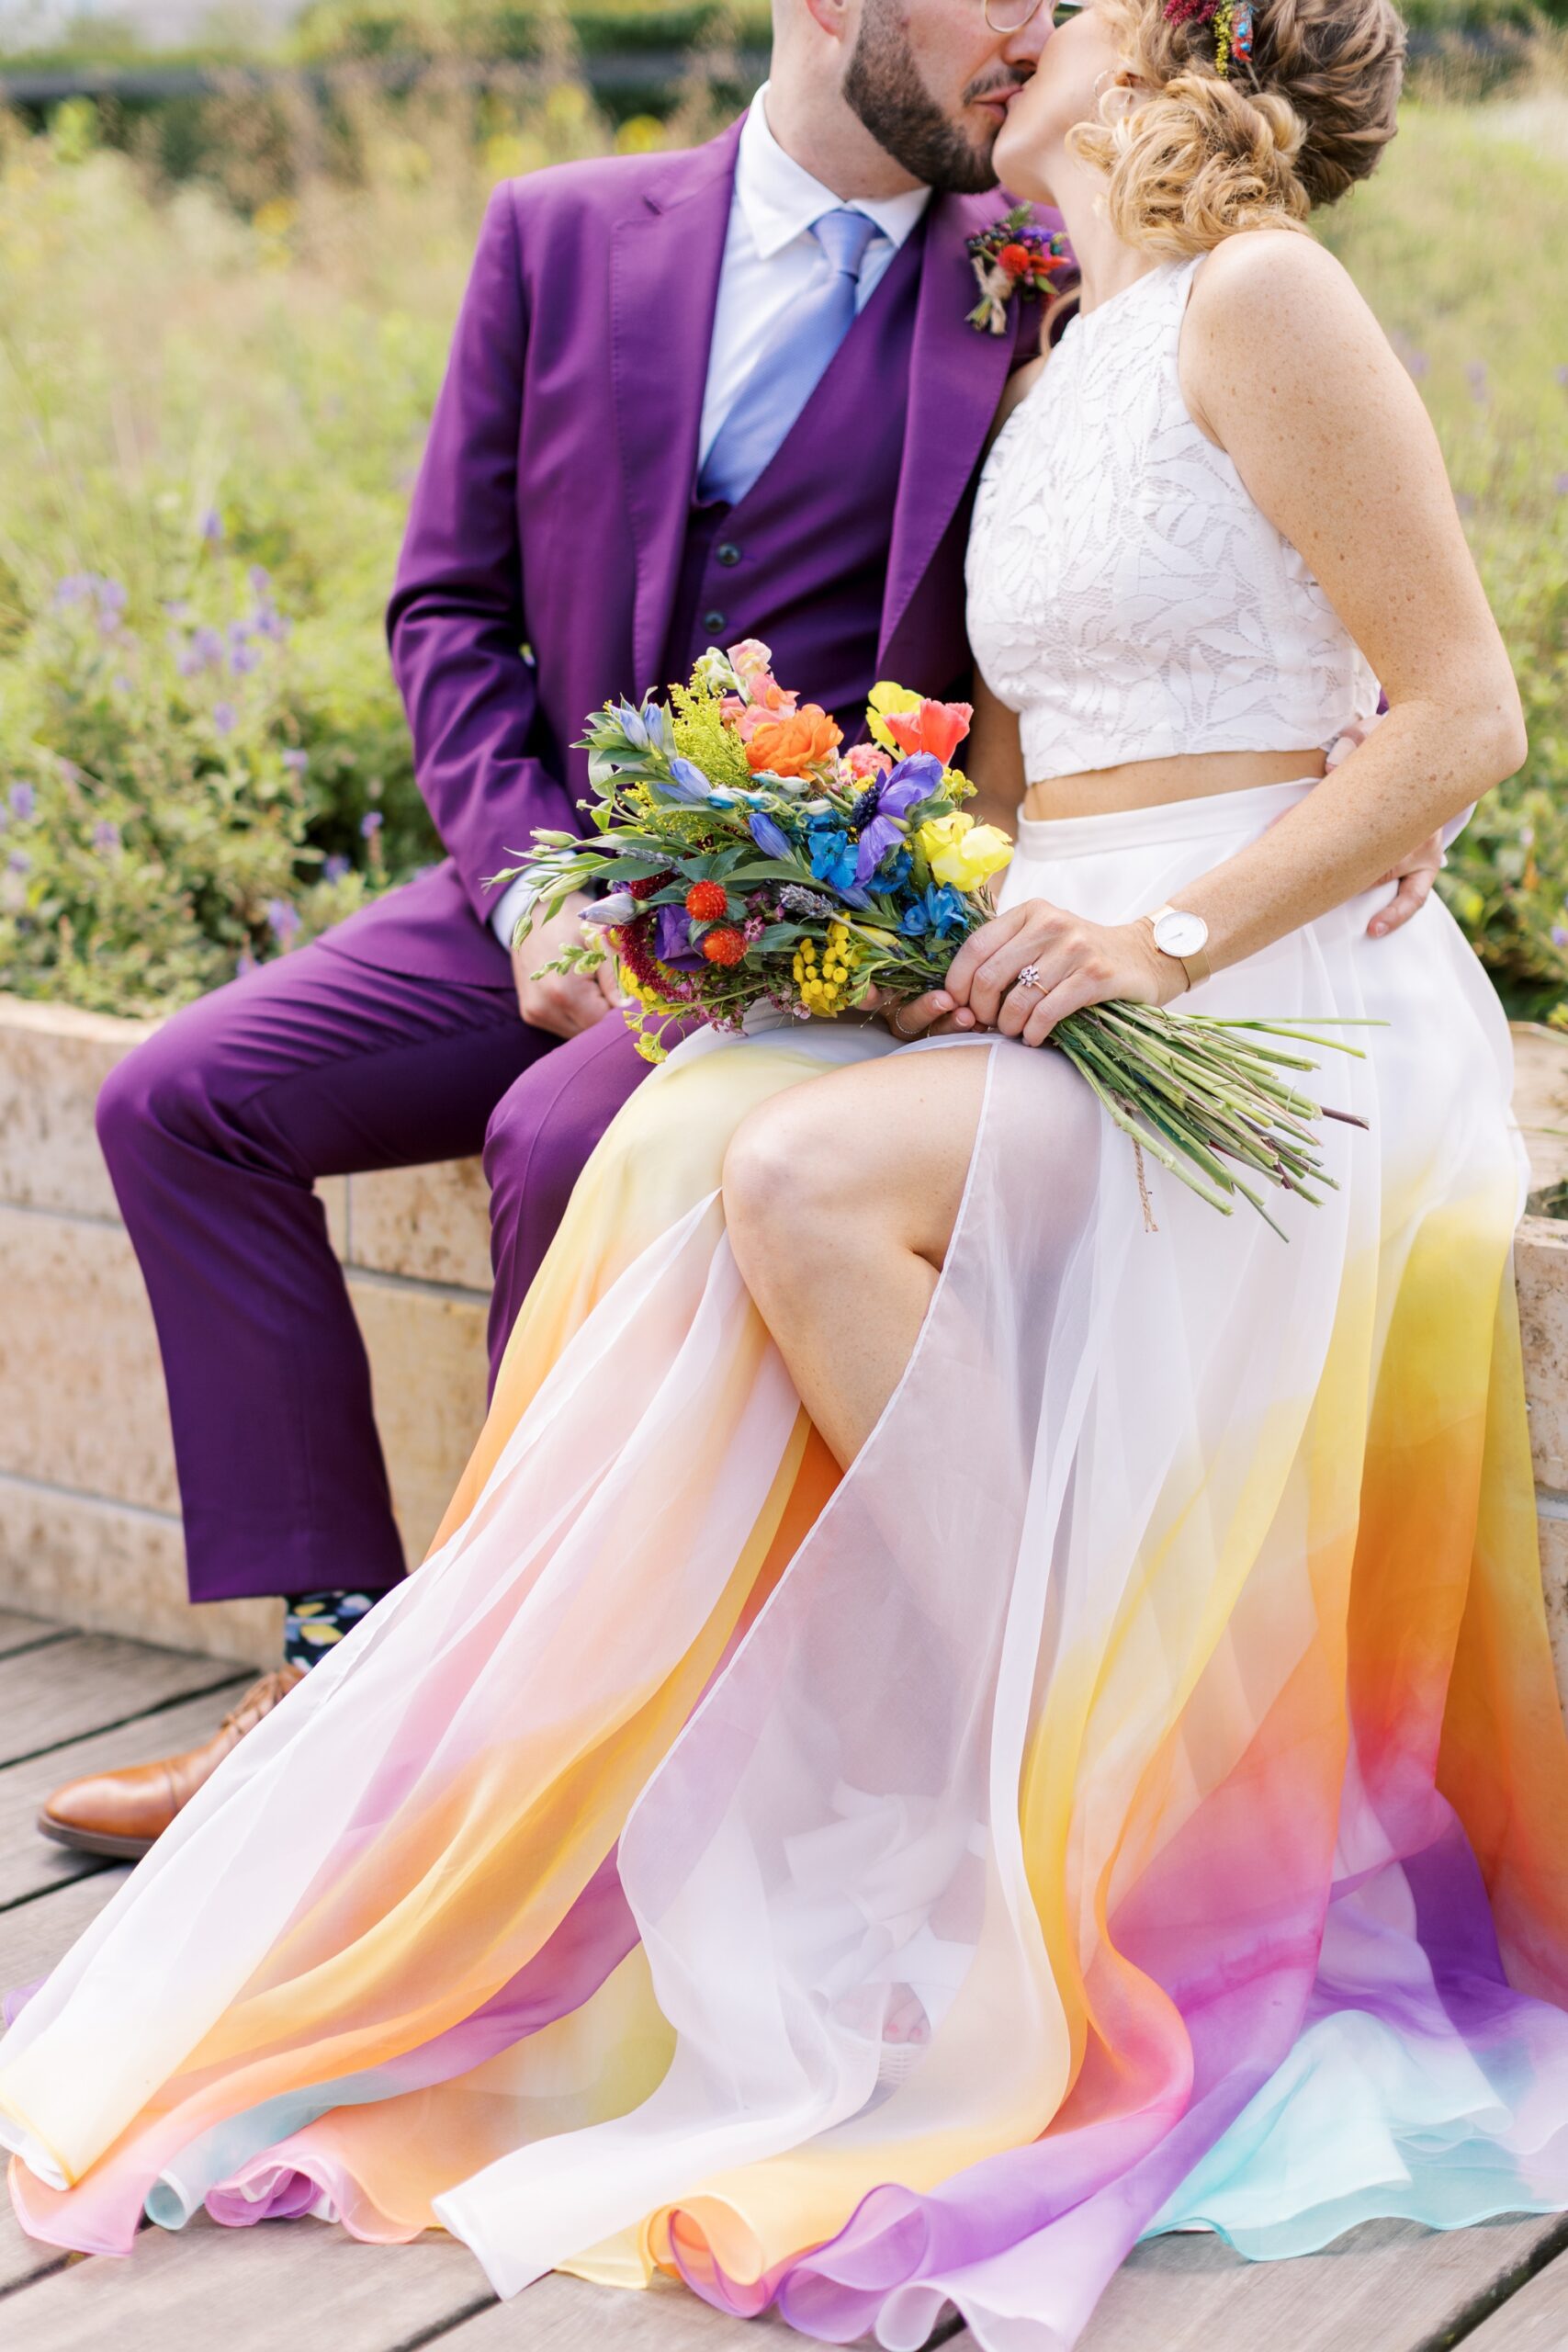 The bride wore a colorful wedding dress and carried a colorful wedding bouquet that fit the colorful wedding palette